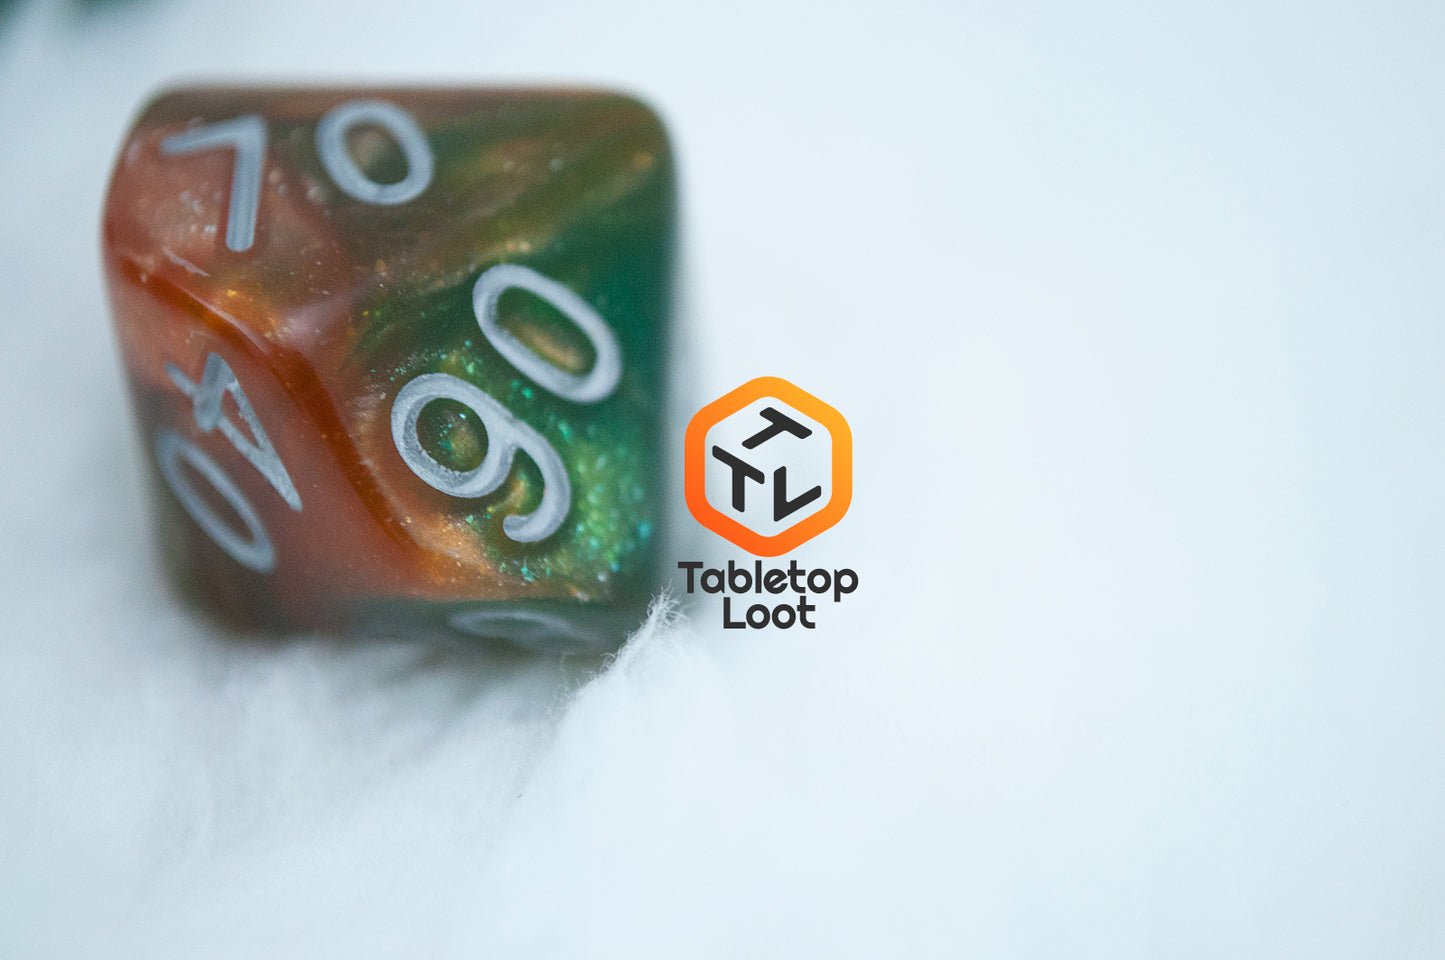 A close up of the D10 from the Emerald Vale 7 piece dice set from Tabletop Loot with swirls of orange in green resin, lots of sparkle, and white numbering.